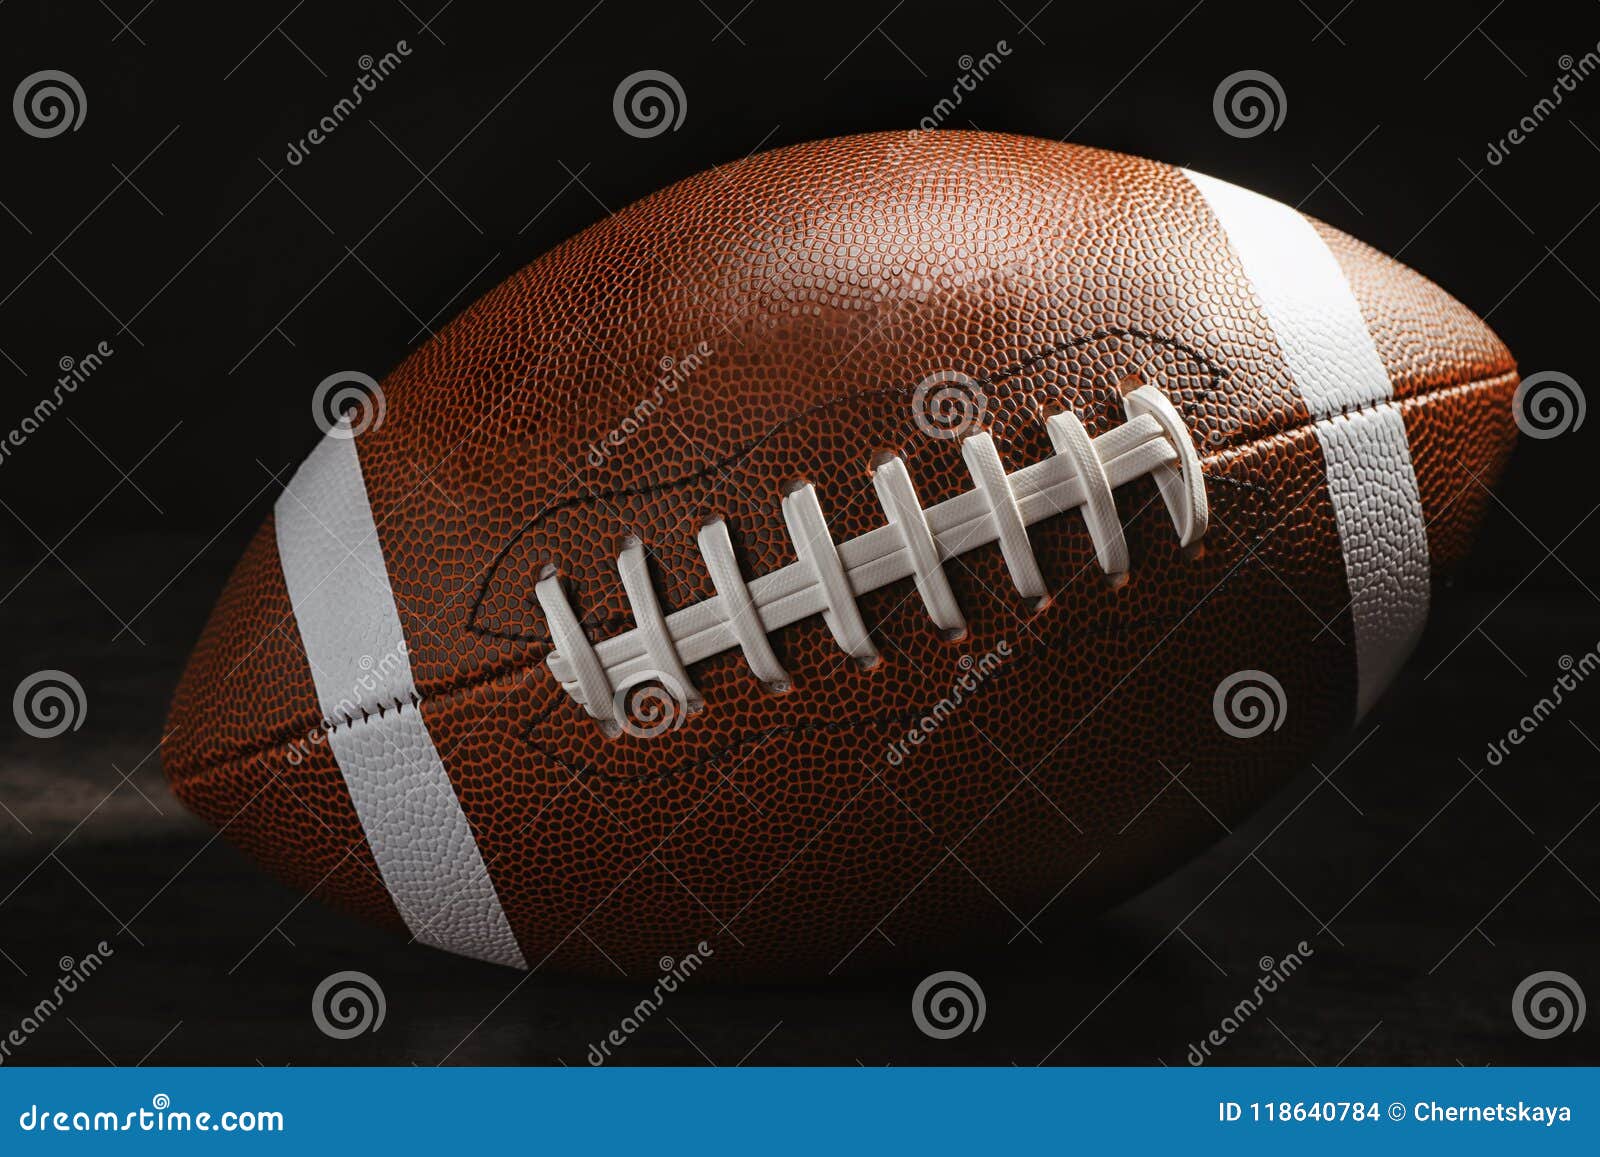 American Football Ball on Table Against Dark Background Stock Photo